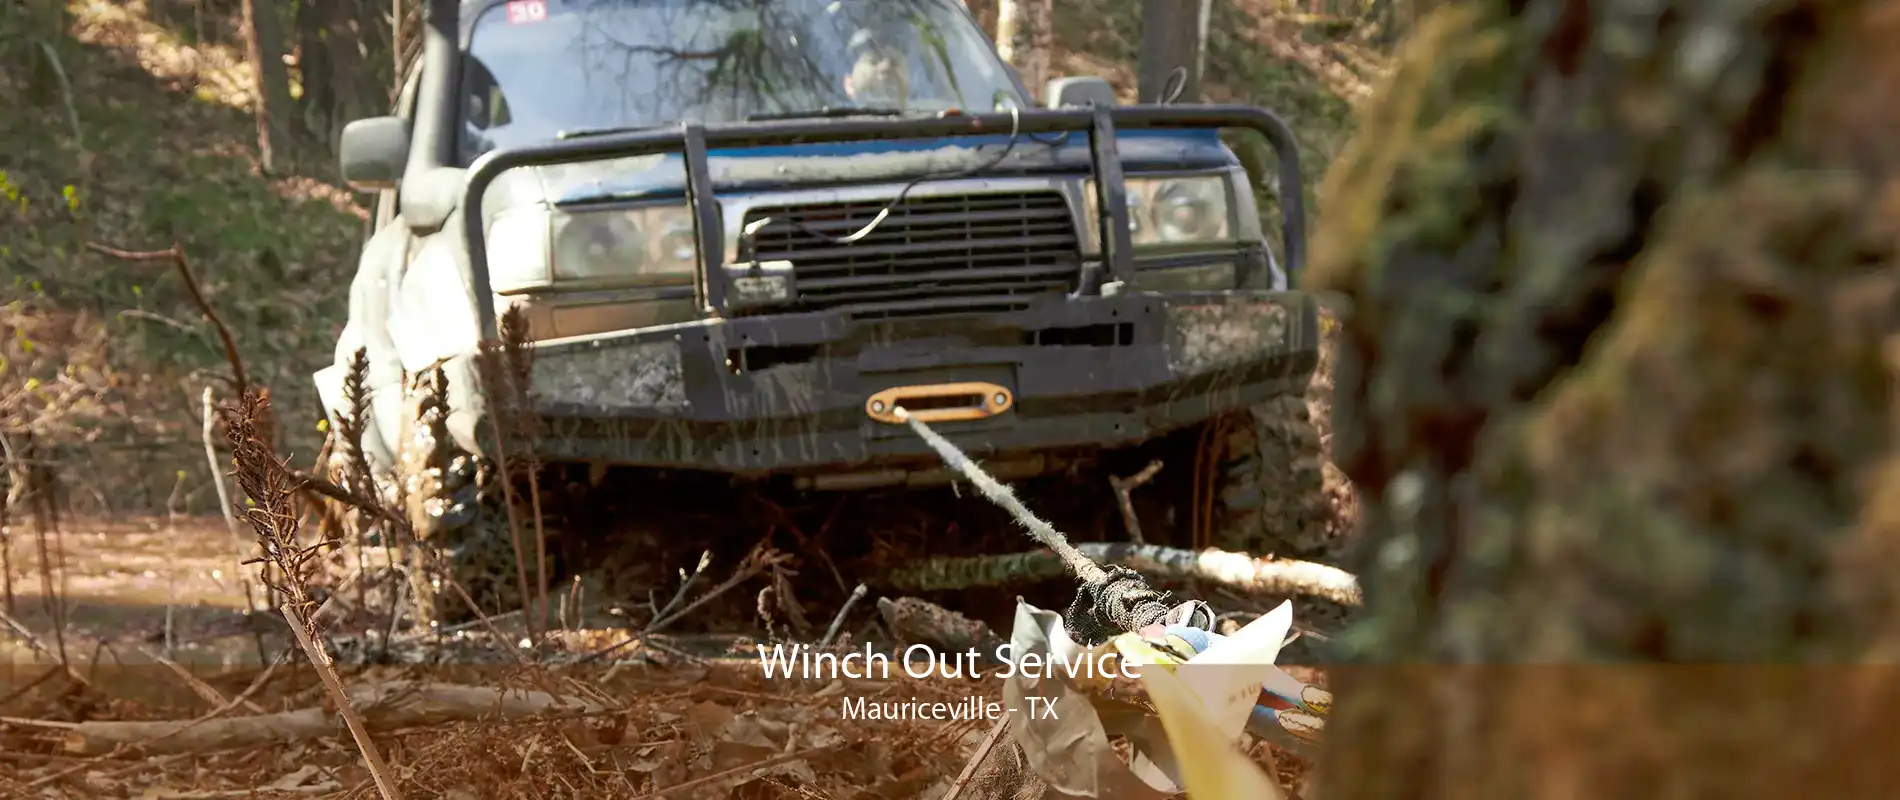 Winch Out Service Mauriceville - TX